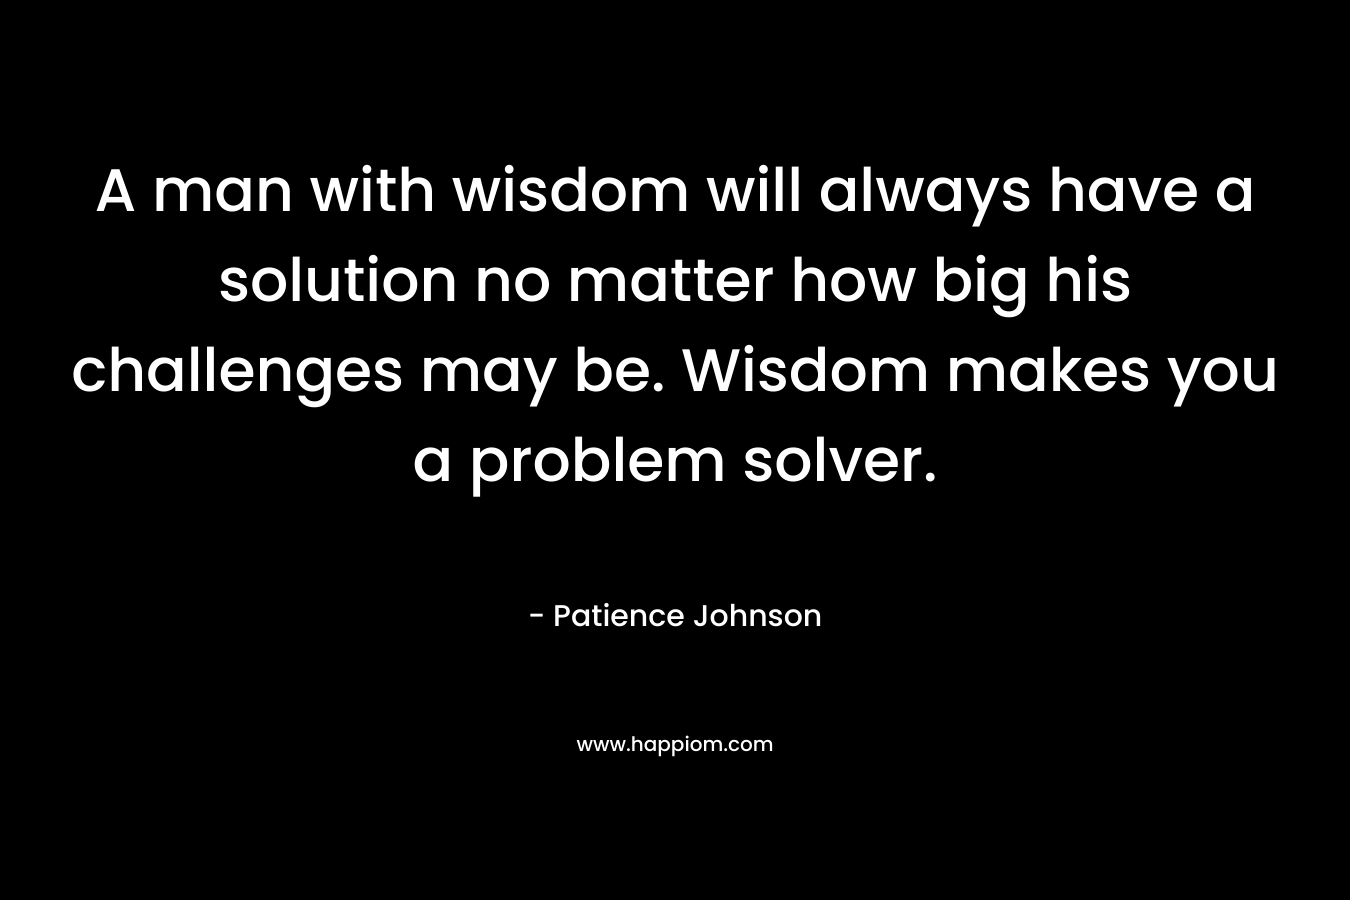 A man with wisdom will always have a solution no matter how big his challenges may be. Wisdom makes you a problem solver.